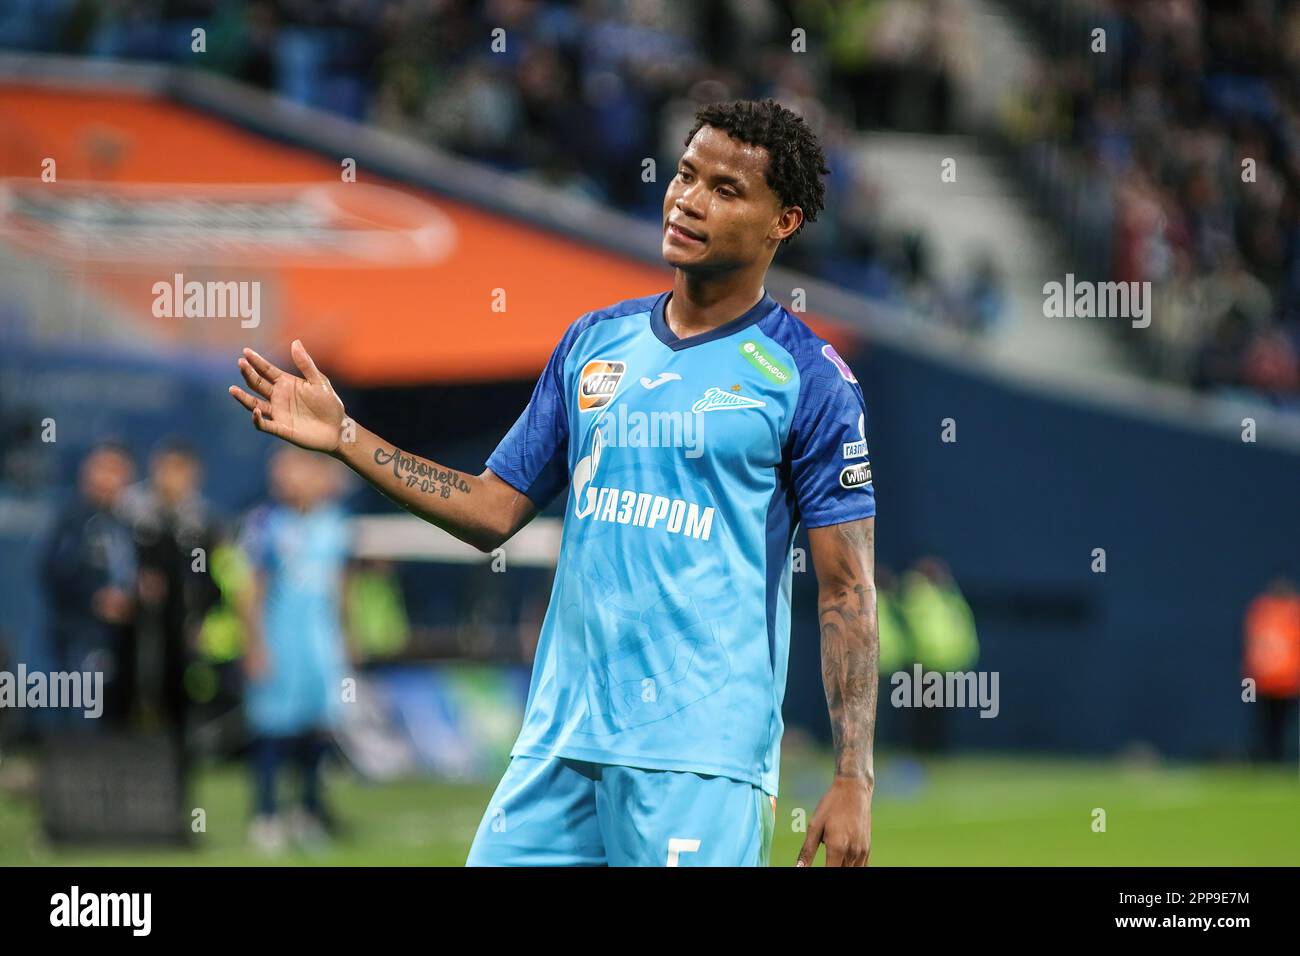 Saint Petersburg, Russia. 22nd Apr, 2023. Wilmar Enrique Barrios Teran, commonly known as Wilmar Barrios (No.5) of Zenit seen during the Russian Premier League football match between Zenit Saint Petersburg and Dynamo Moscow at Gazprom Arena. Zenit 3:1 Dynamo. (Photo by Maksim Konstantinov/SOPA Images/Sipa USA) Credit: Sipa USA/Alamy Live News Stock Photo